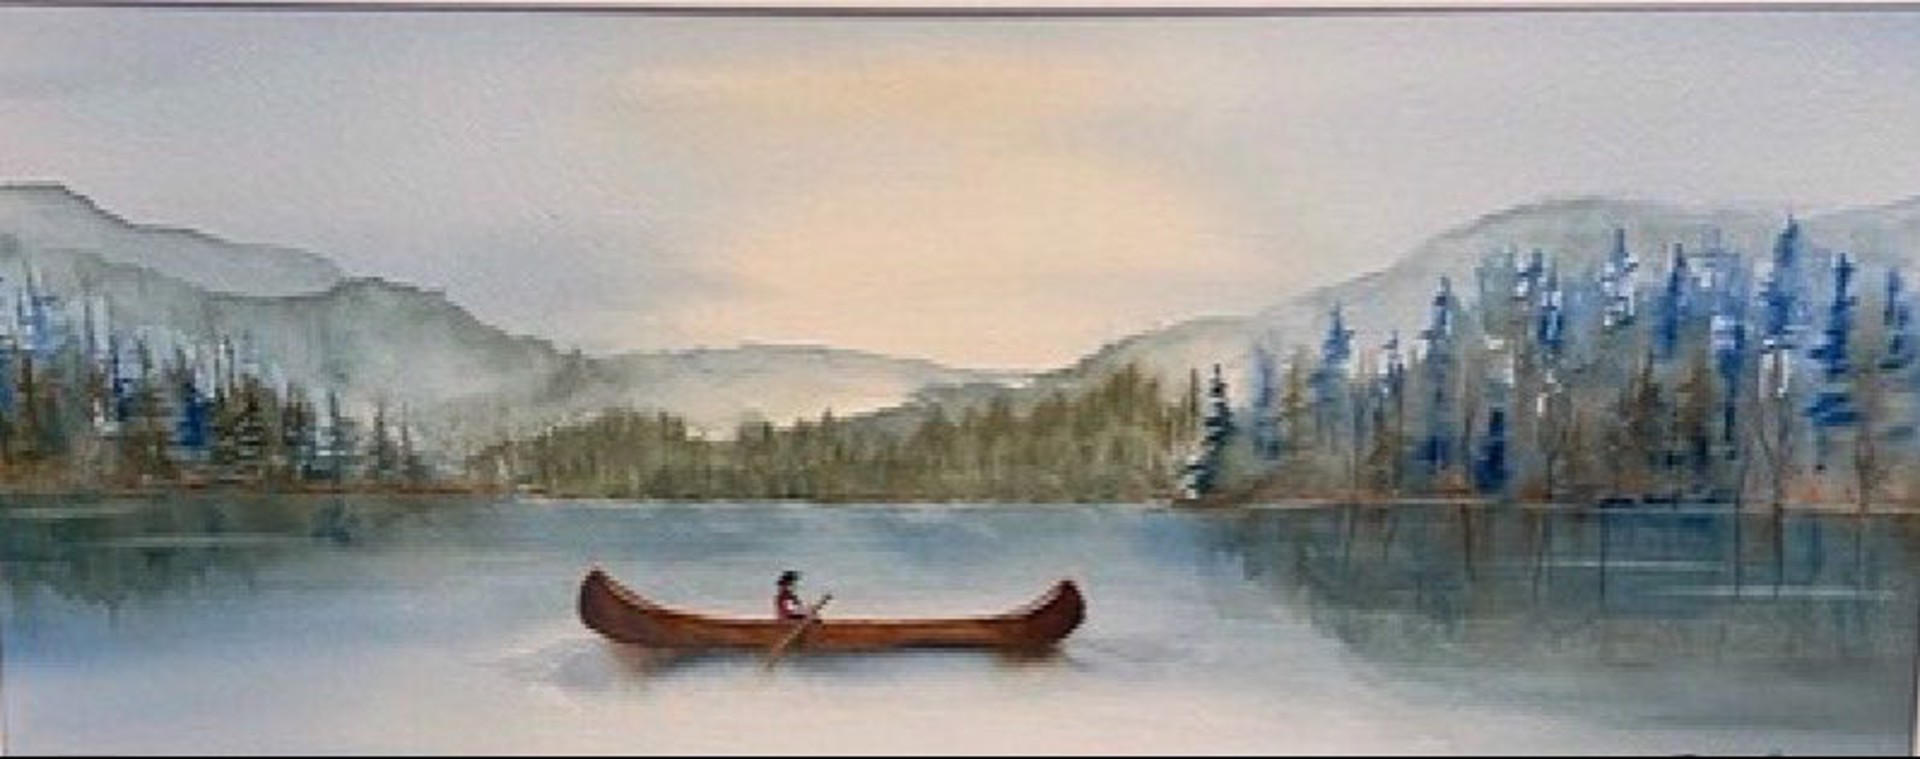 On the Lake by Sheryl Besette